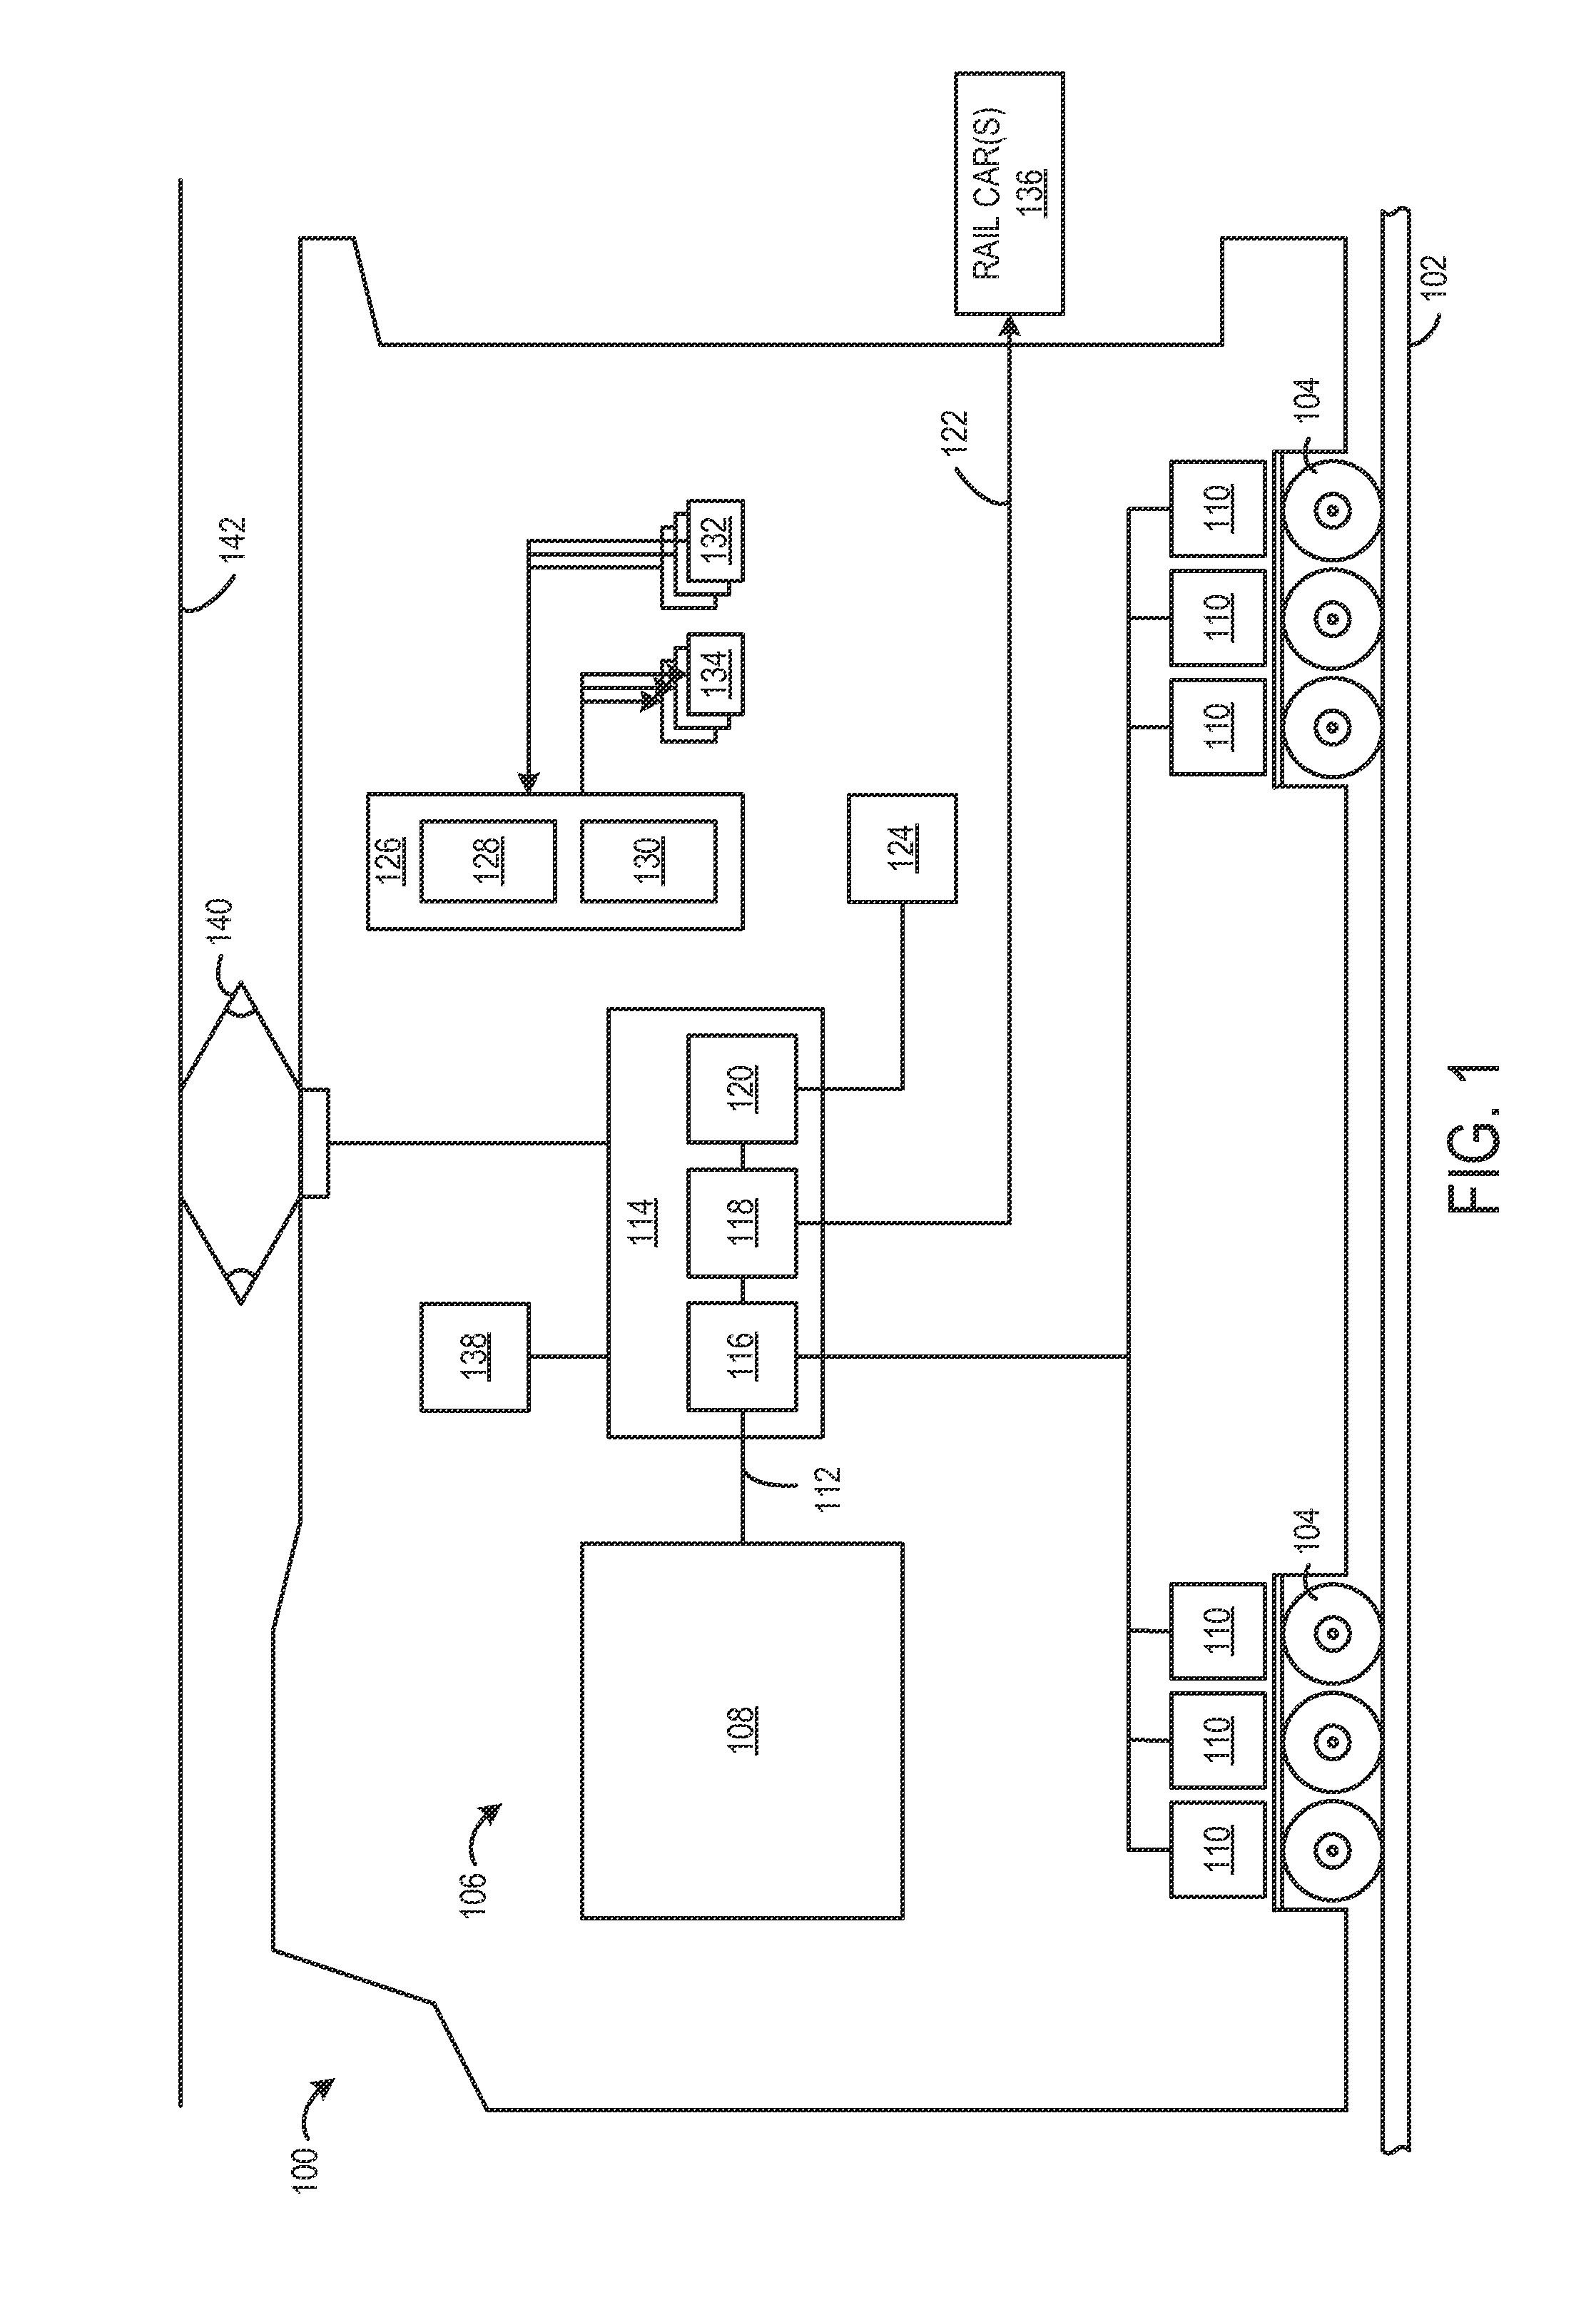 Systems and methods for generating power in a vehicle